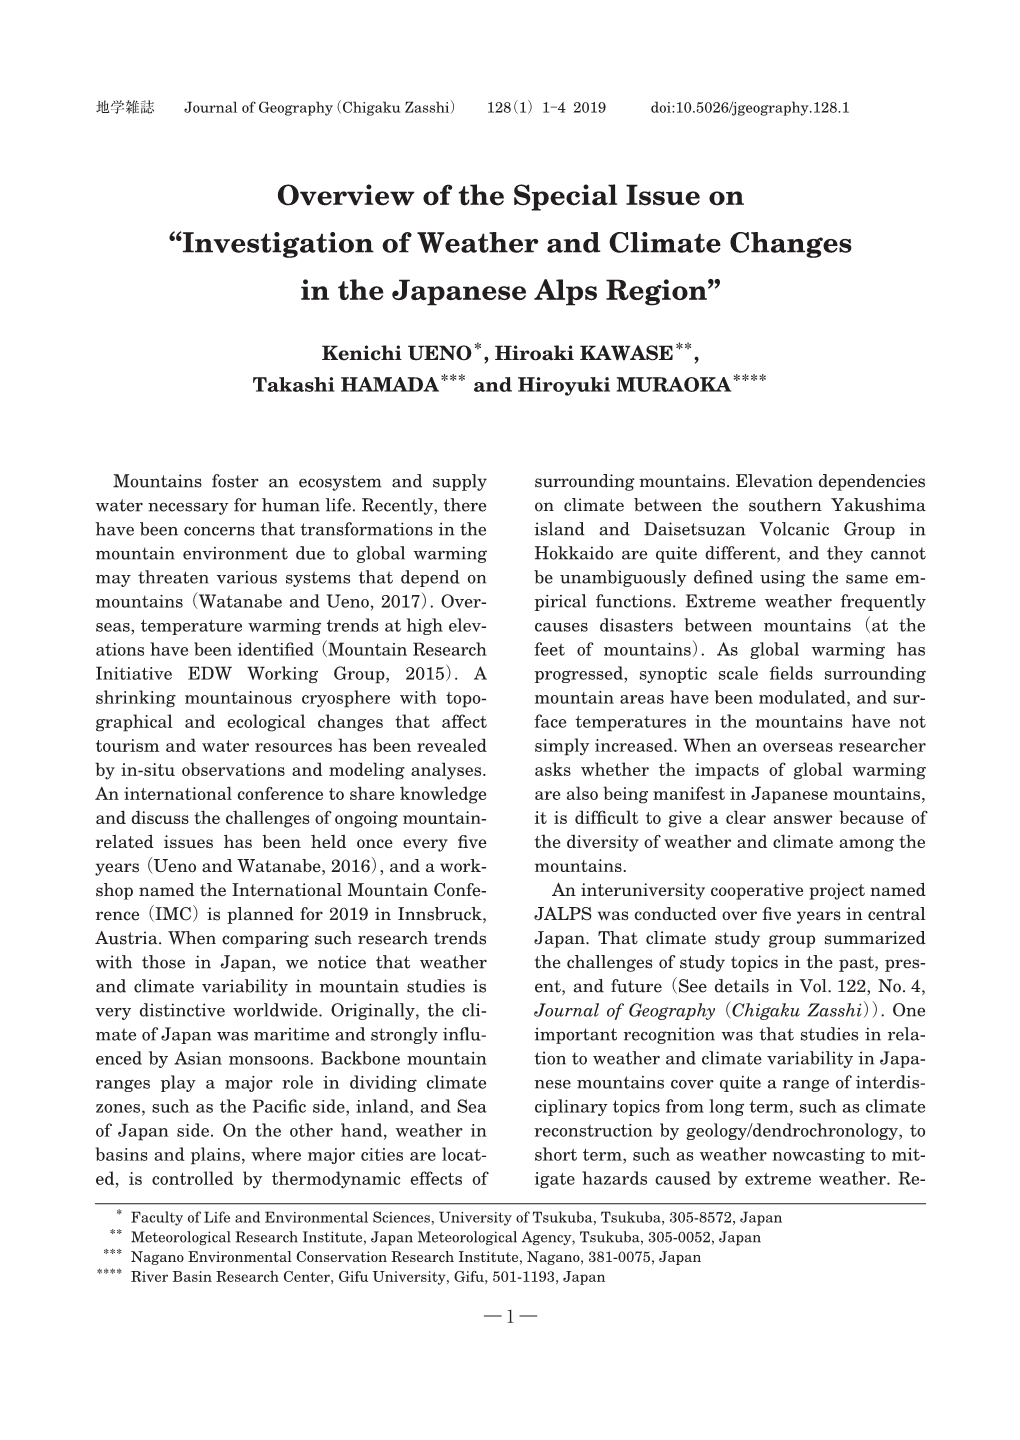 Investigation of Weather and Climate Changes in the Japanese Alps Region”